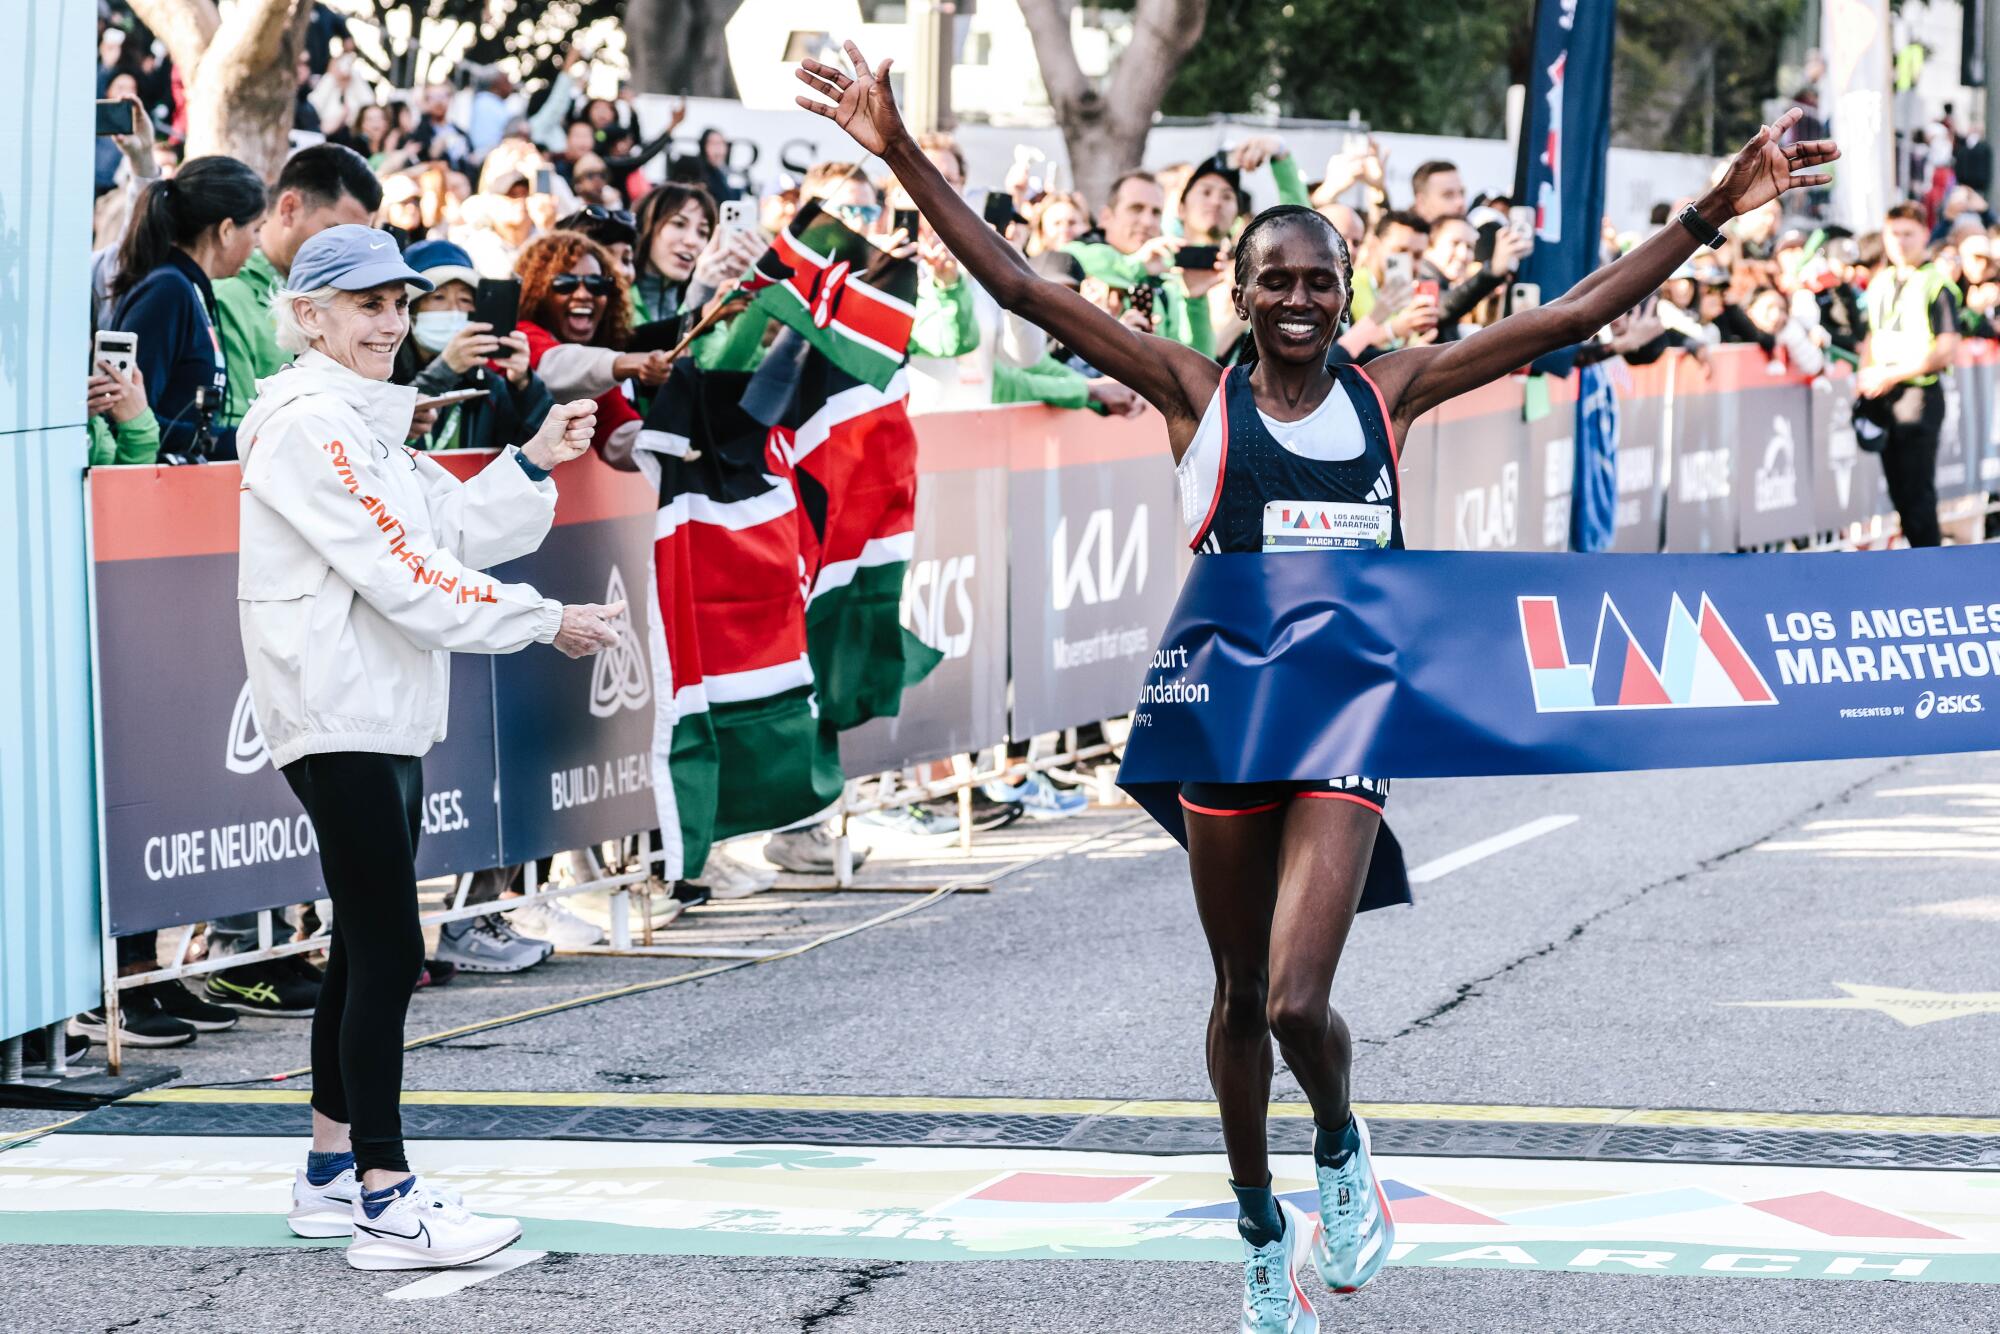 Stacy Ndiwa raises her arms at the L.A. Marathon finish line.